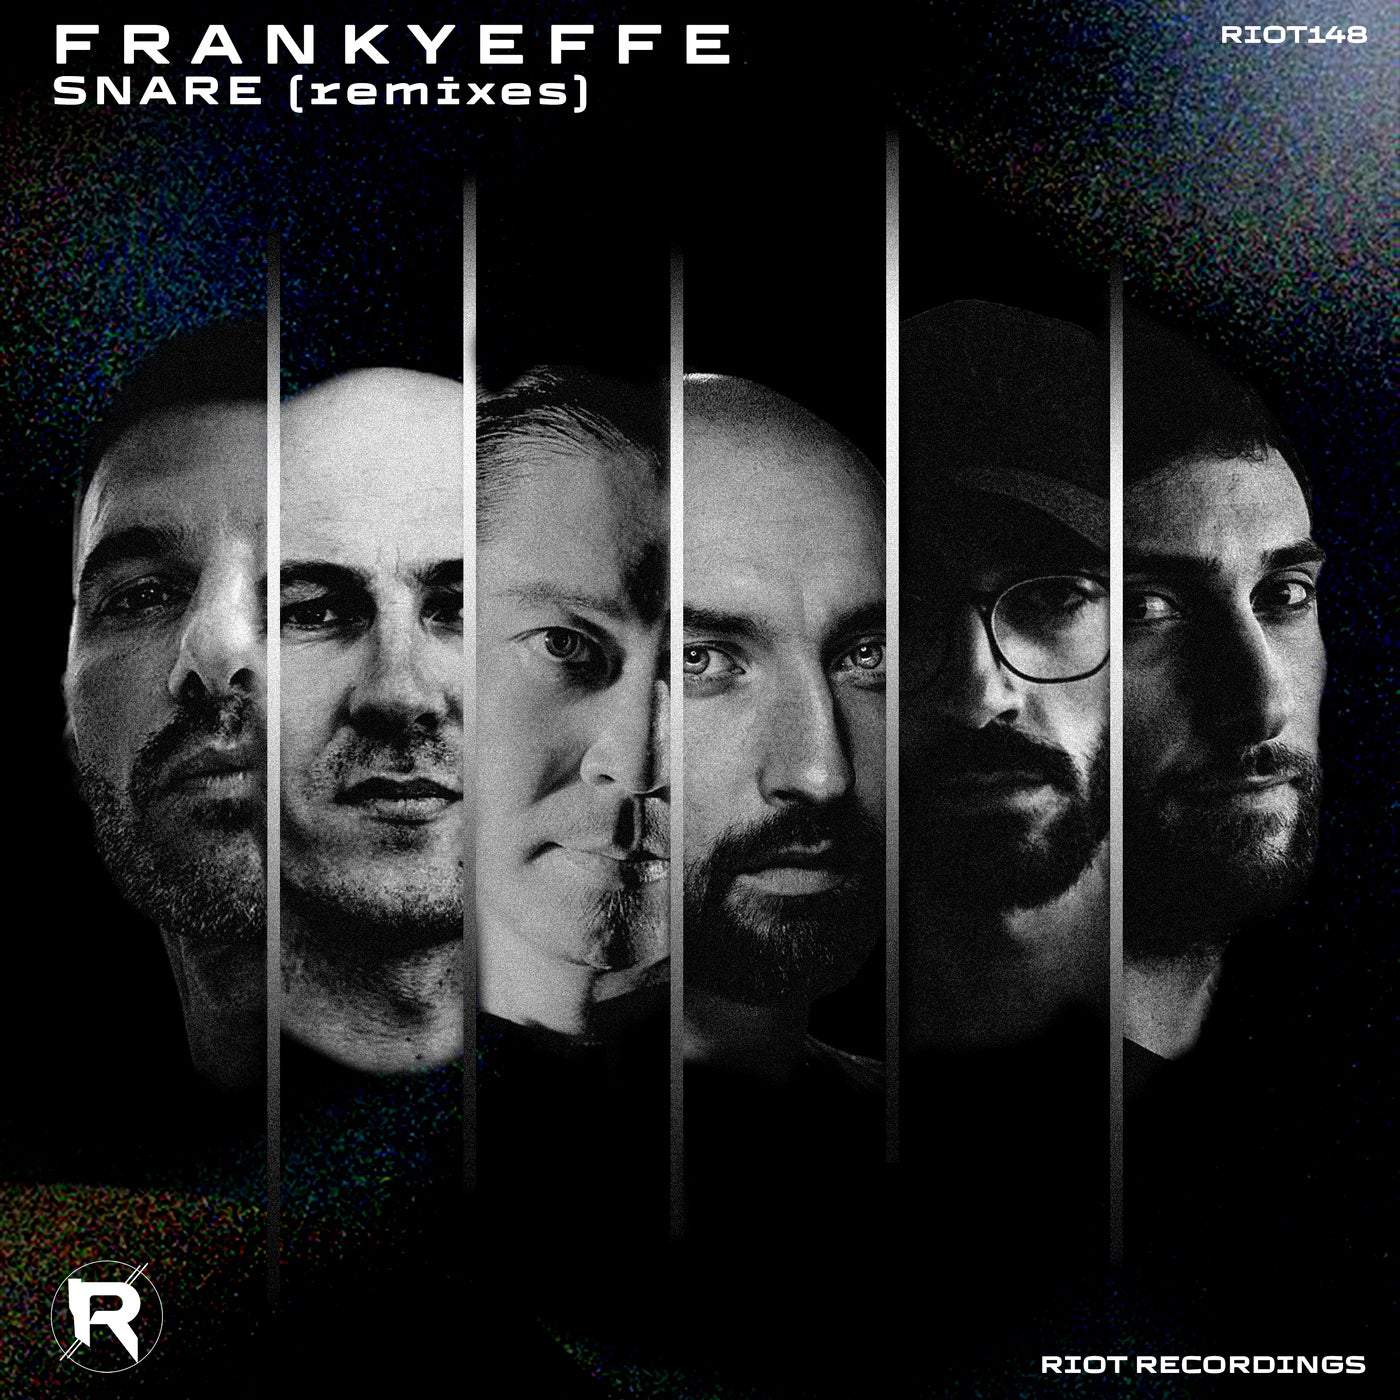 image cover: Frankyeffe - Snare (Remixes) / RIOT148